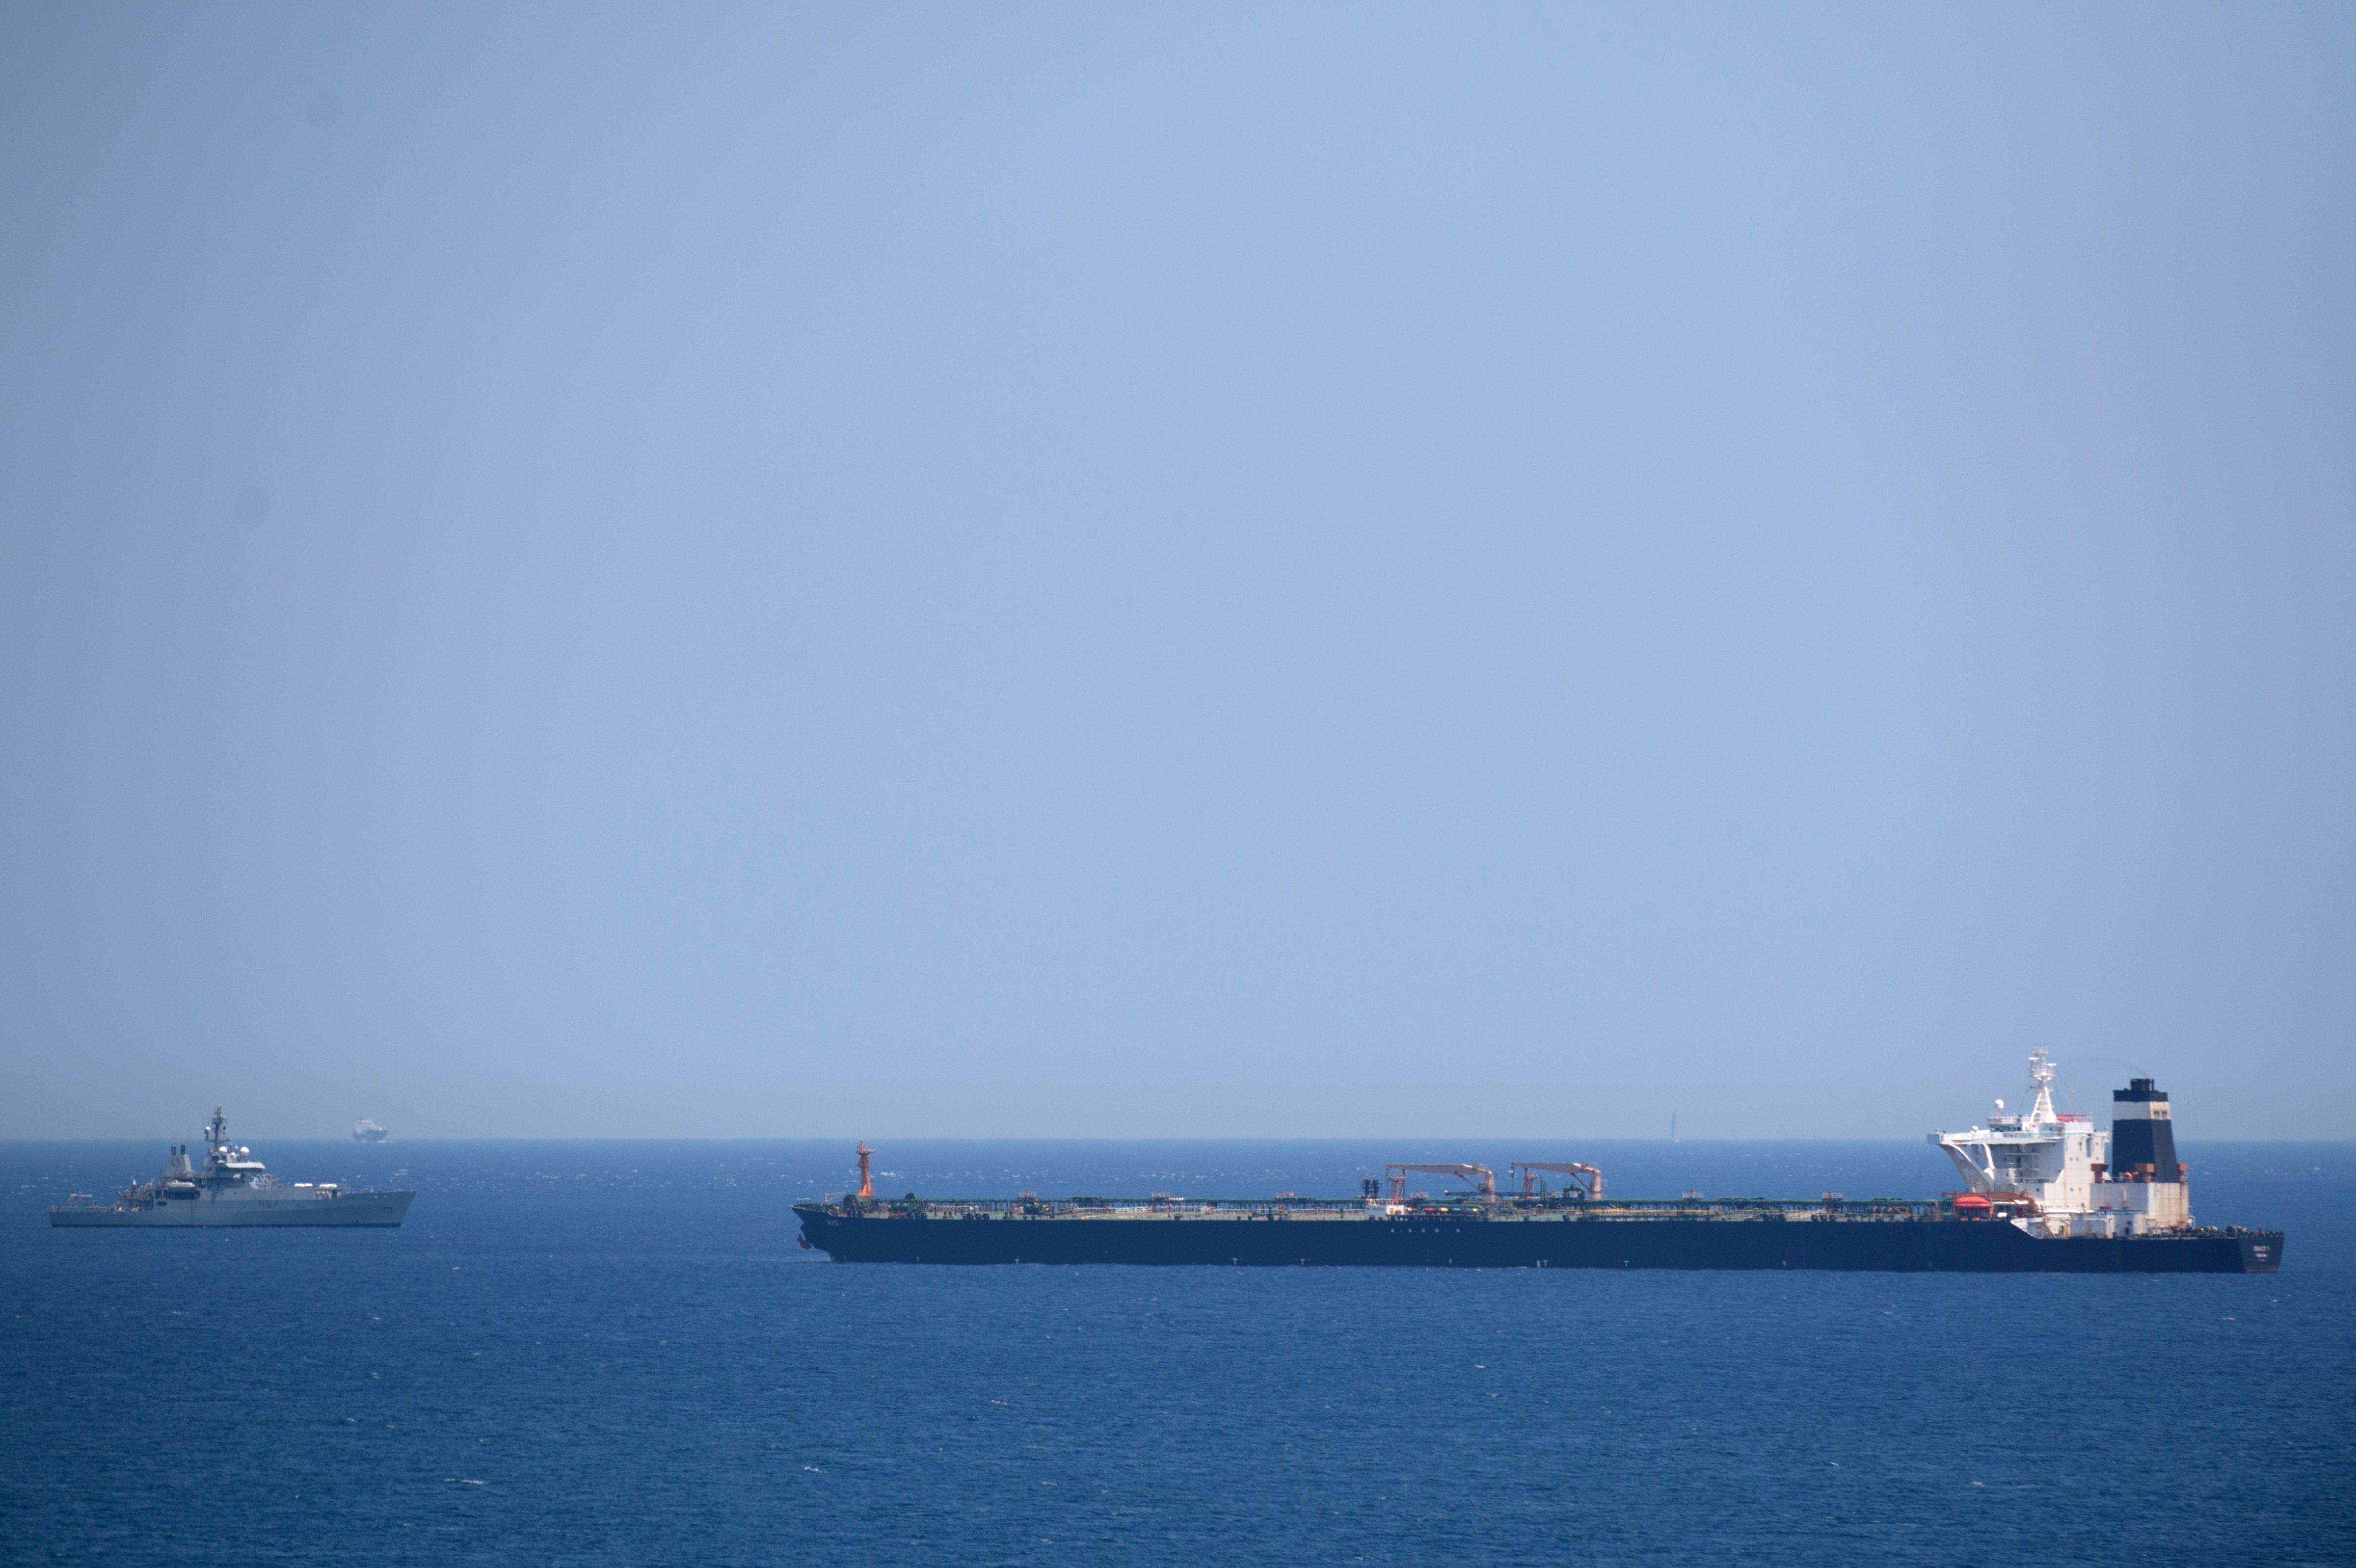 A British Royal Navy ship (L) patrols near supertanker Grace 1 suspected of carrying crude oil to Syria in violation of EU sanctions after it was detained off the coast of Gibraltar on July 4, 2019. (JORGE GUERRERO&mdash;AFP/Getty Images)